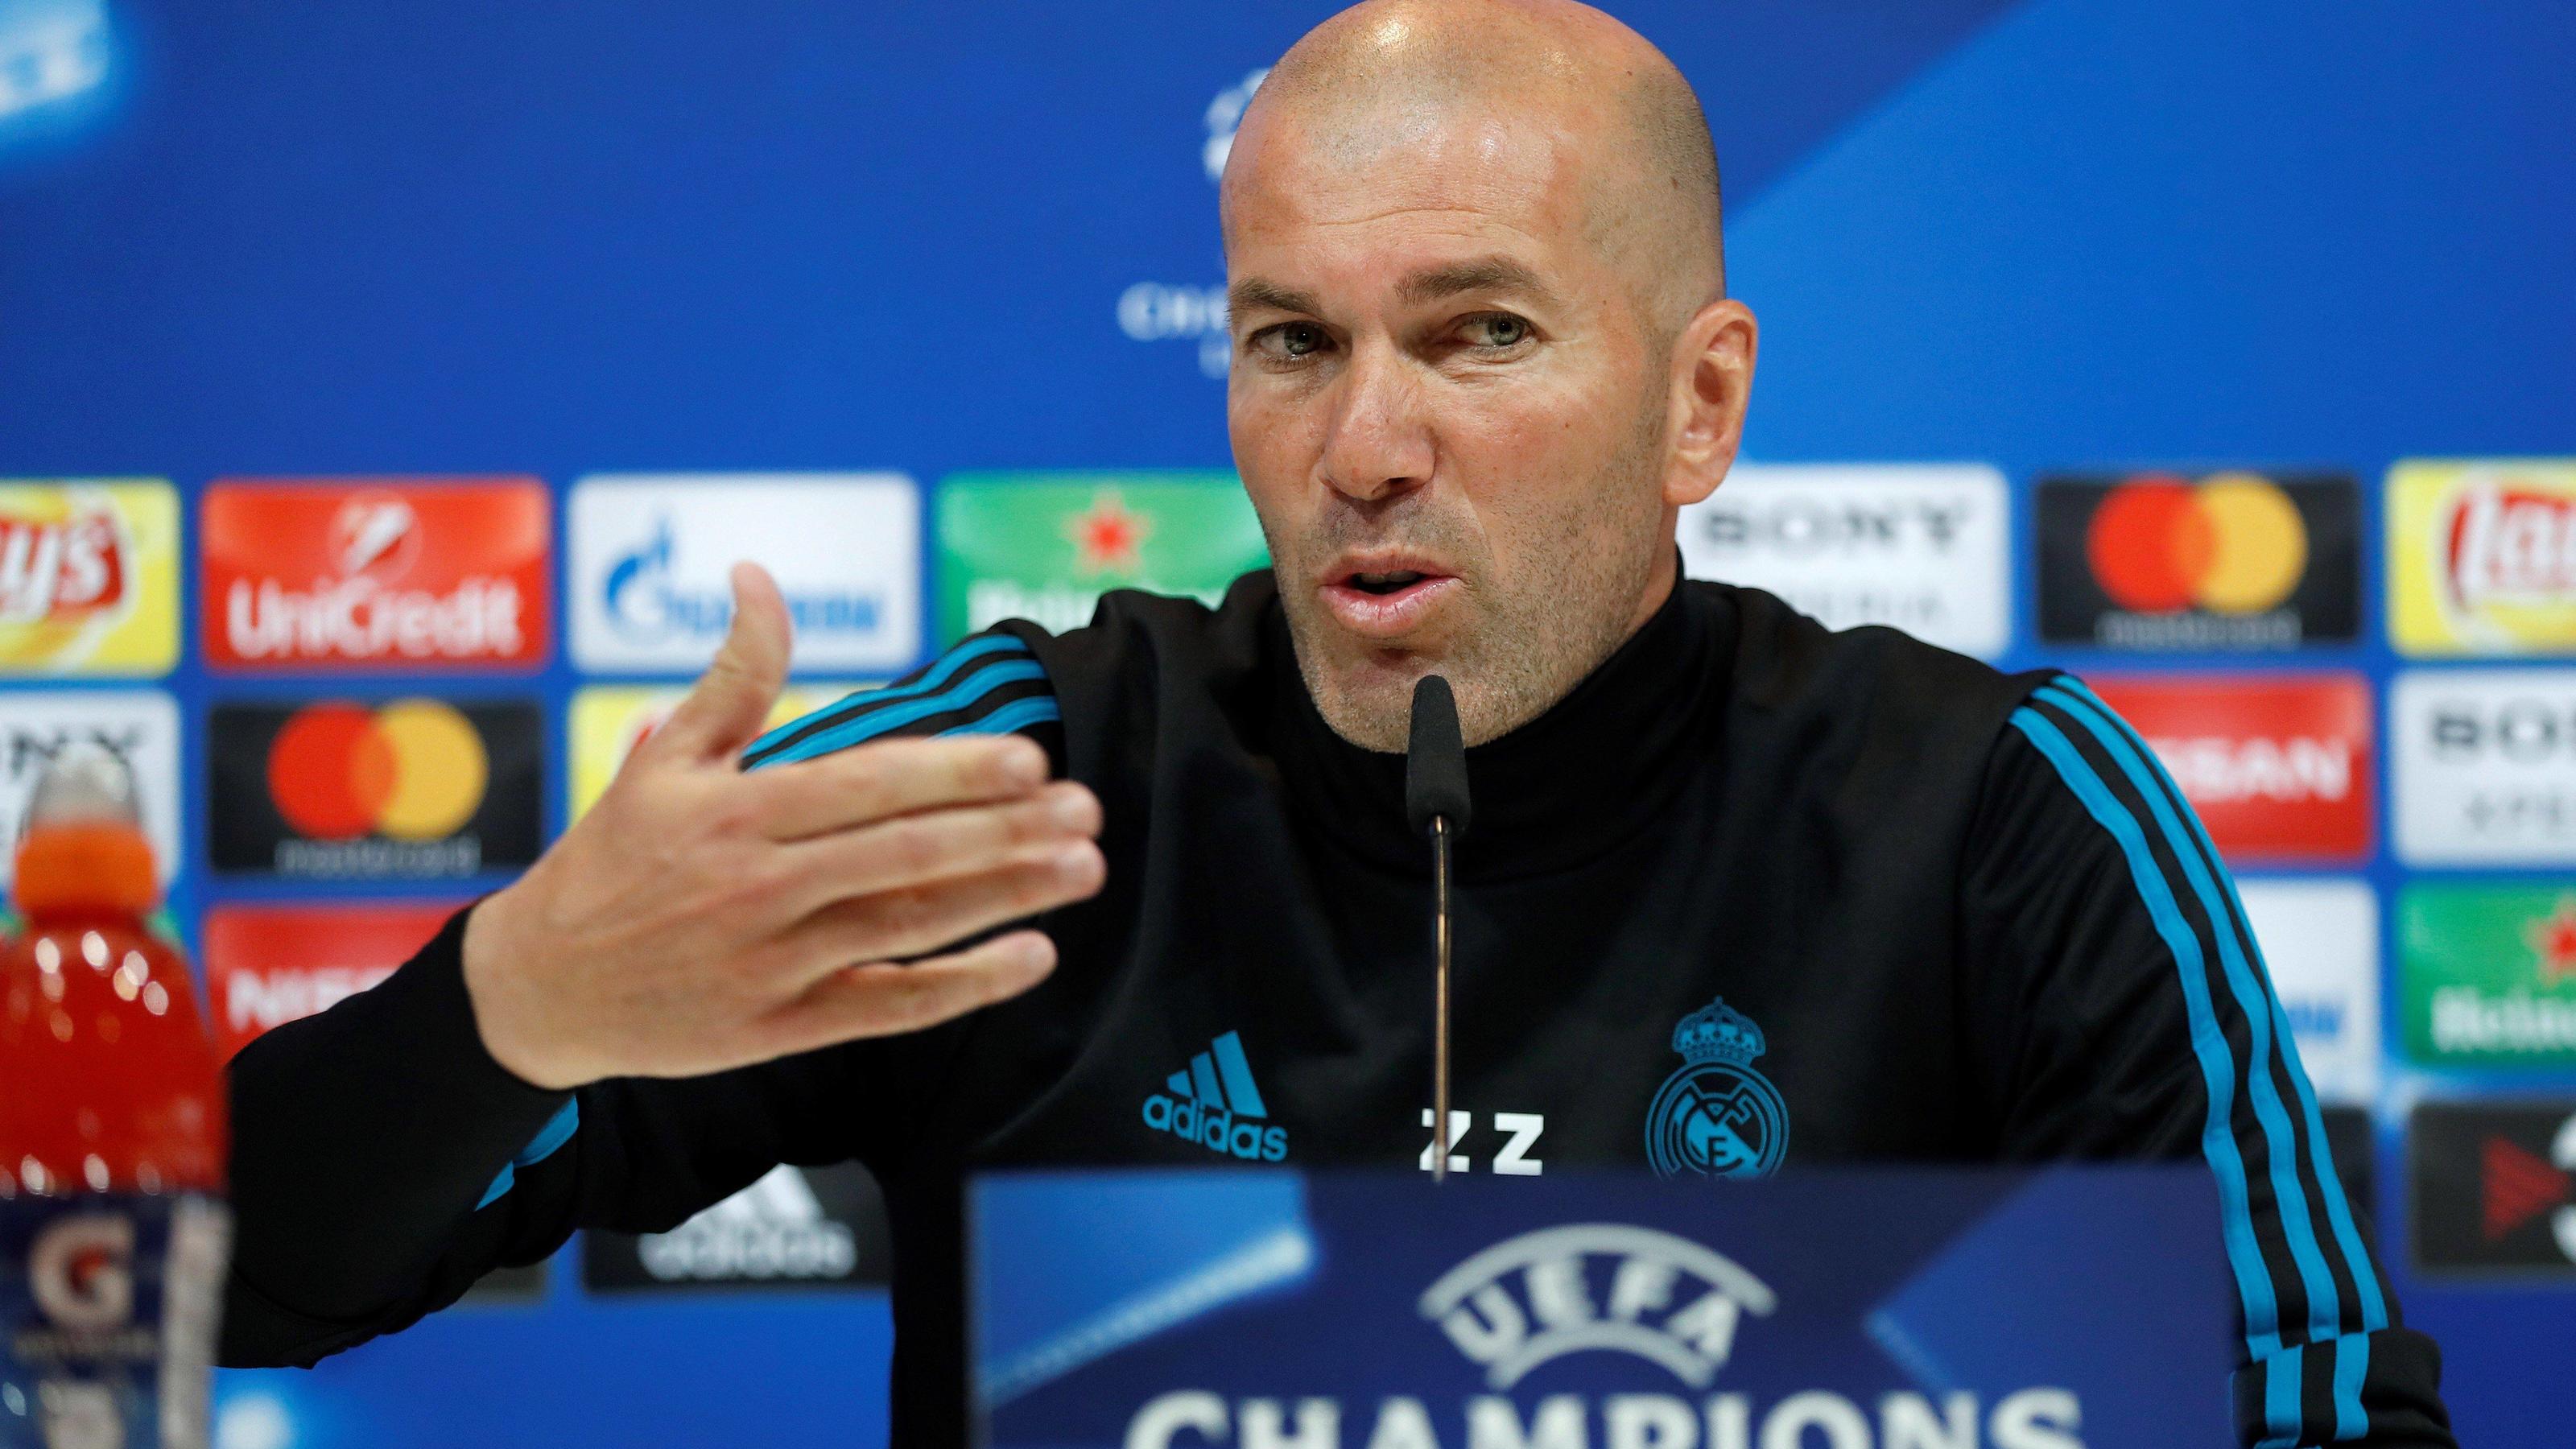 Real Madrid s head coach Zinedine Zidane speaks during a press conference PK Pressekonferenz at Valdebebas sports facilities in Madrid, Spain, 30 April 2018.Real Madrid will face Bayern Munich in their UEFA Champions League semi finals second leg mat